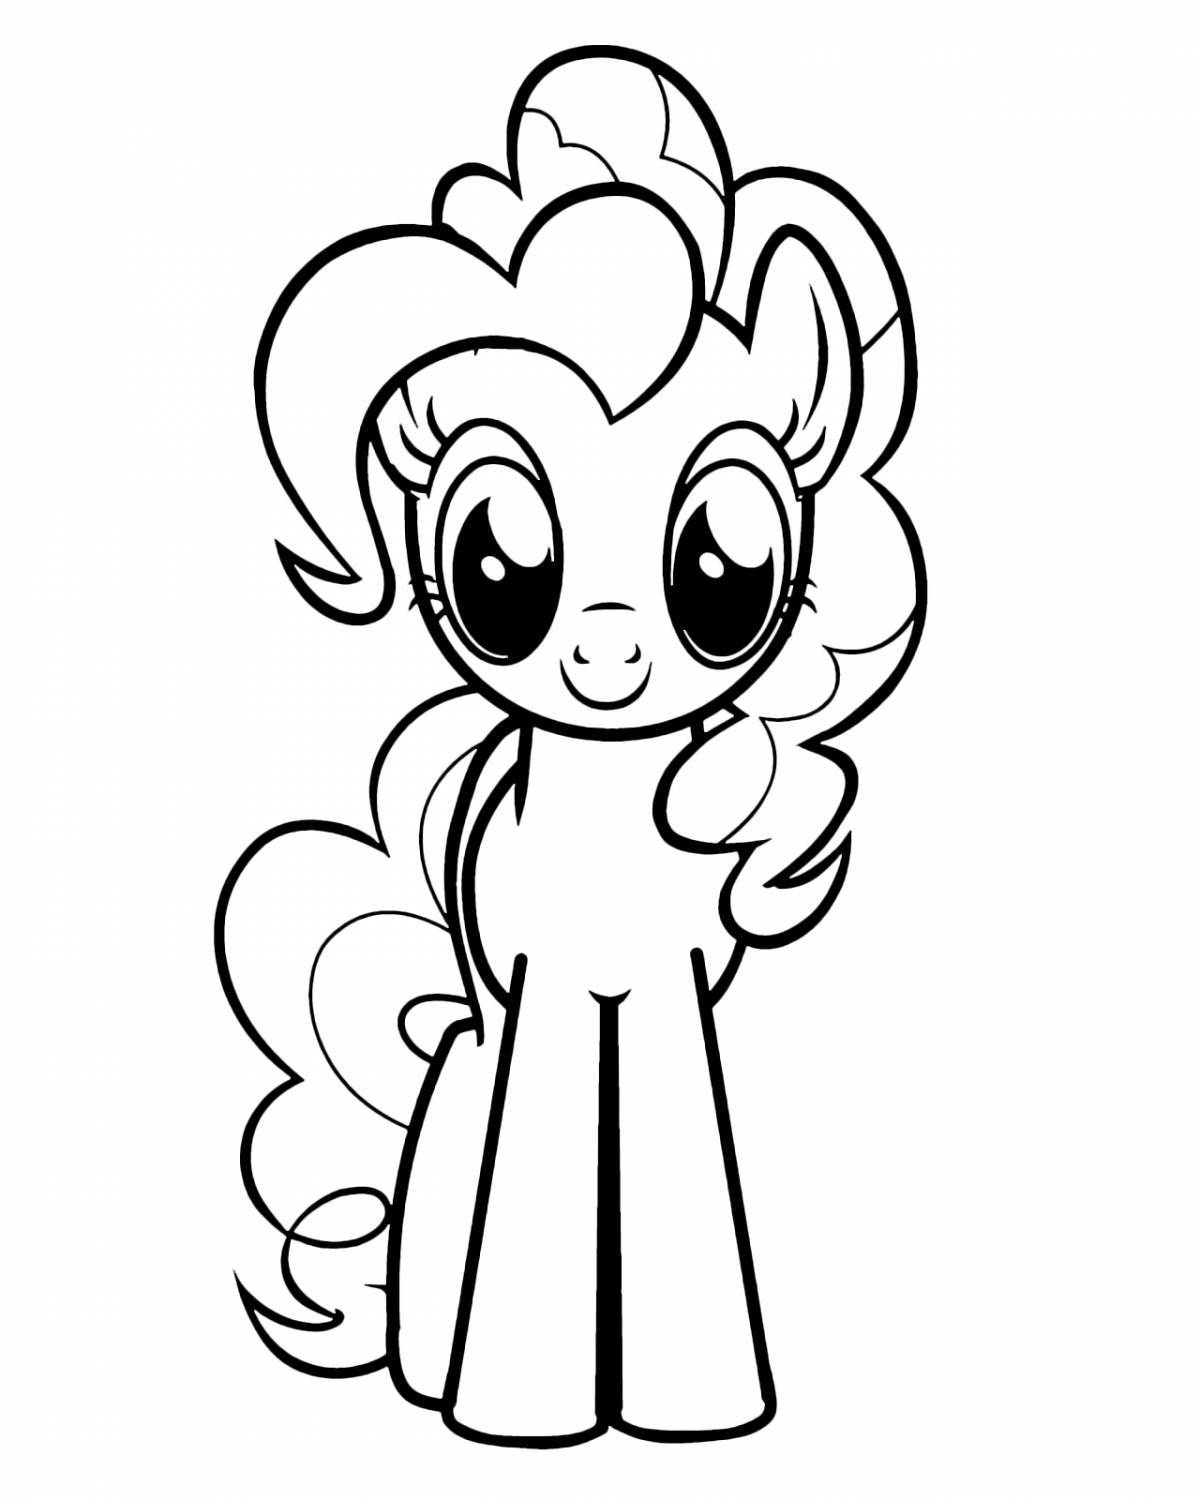 Fun pony coloring pages